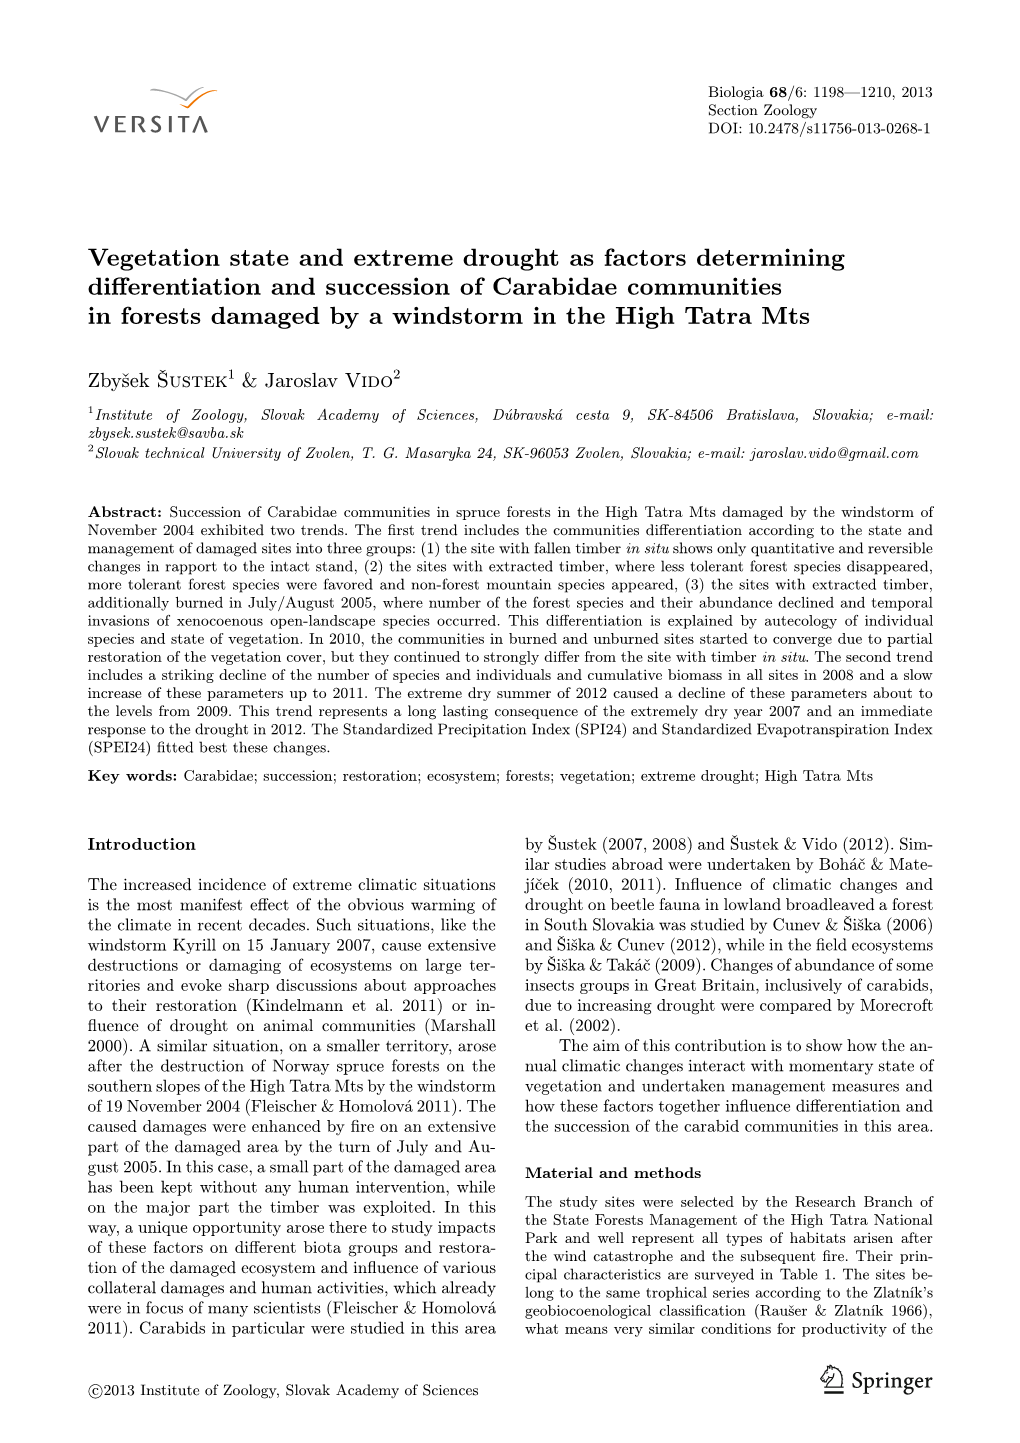 Vegetation State and Extreme Drought As Factors Determining